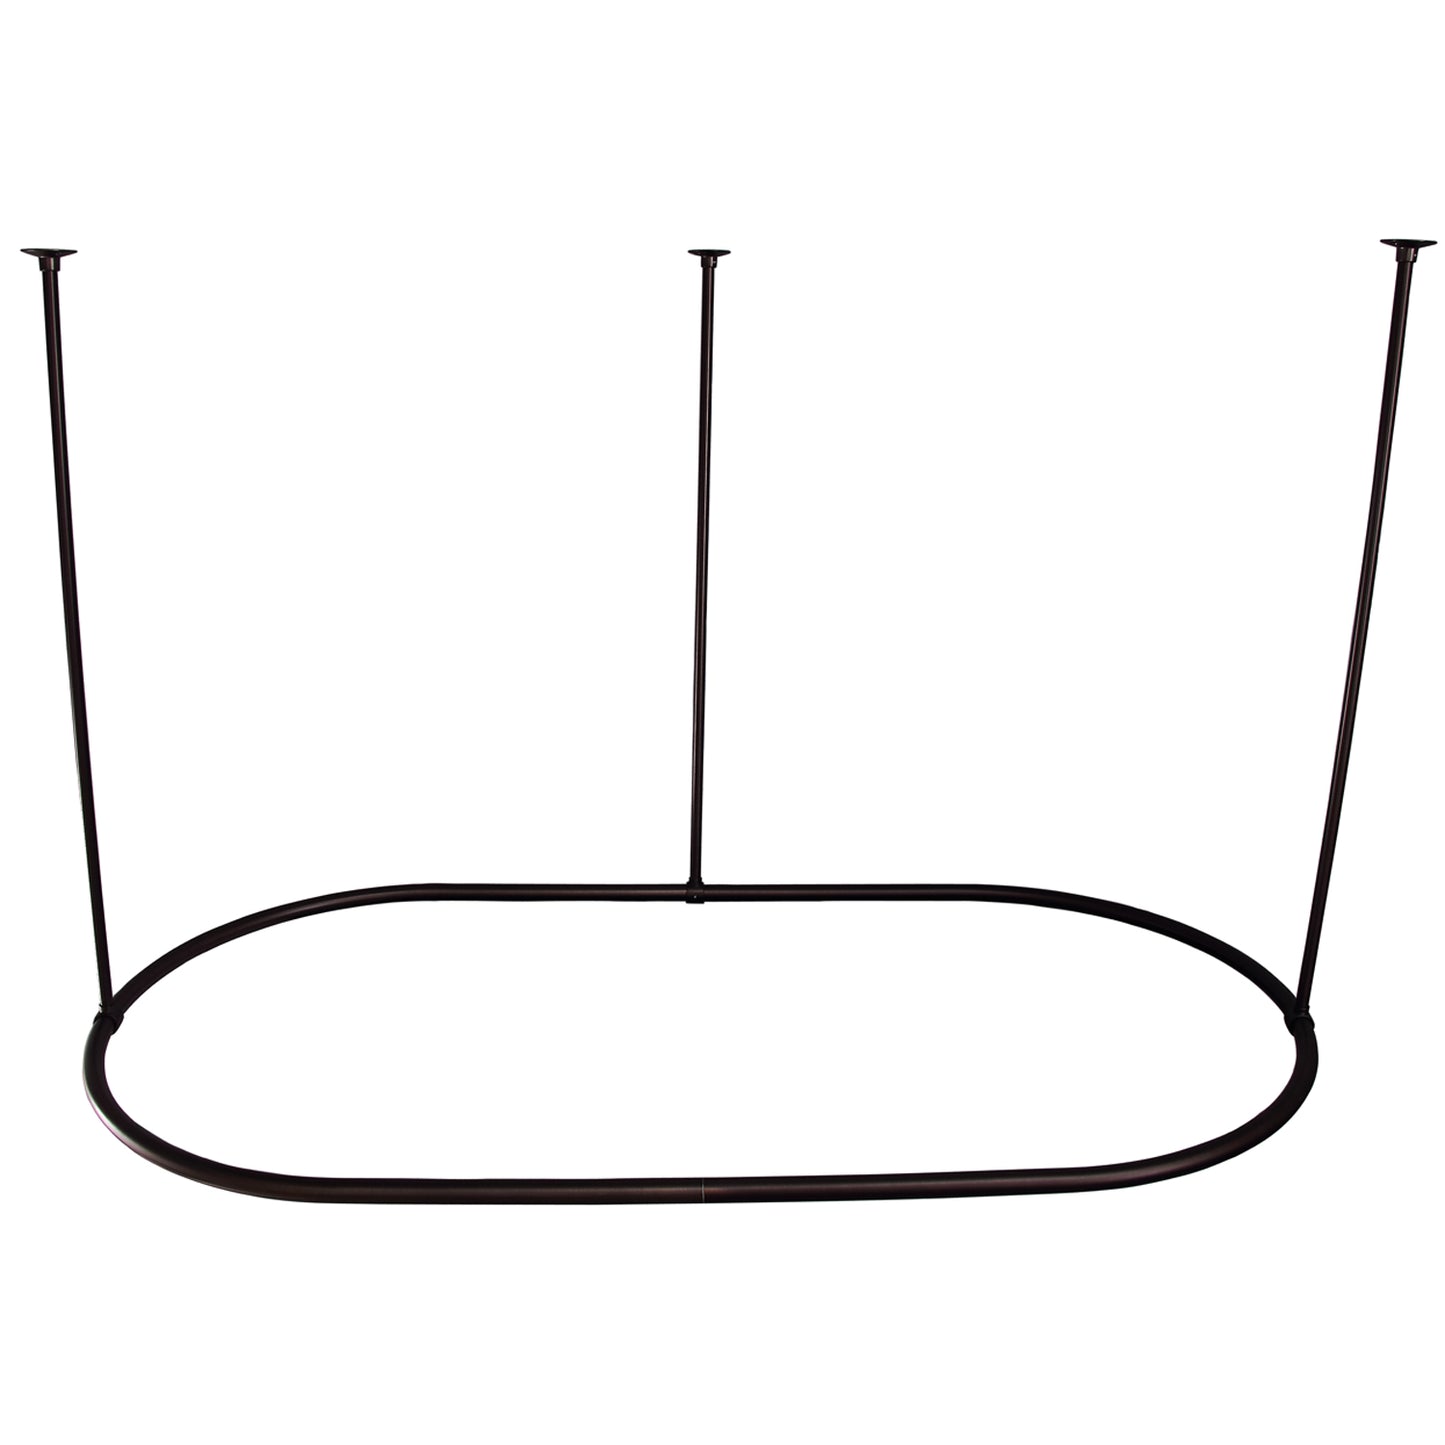 60" x 36" Oval Shower Curtain Ring in Oil Rubbed Bronze